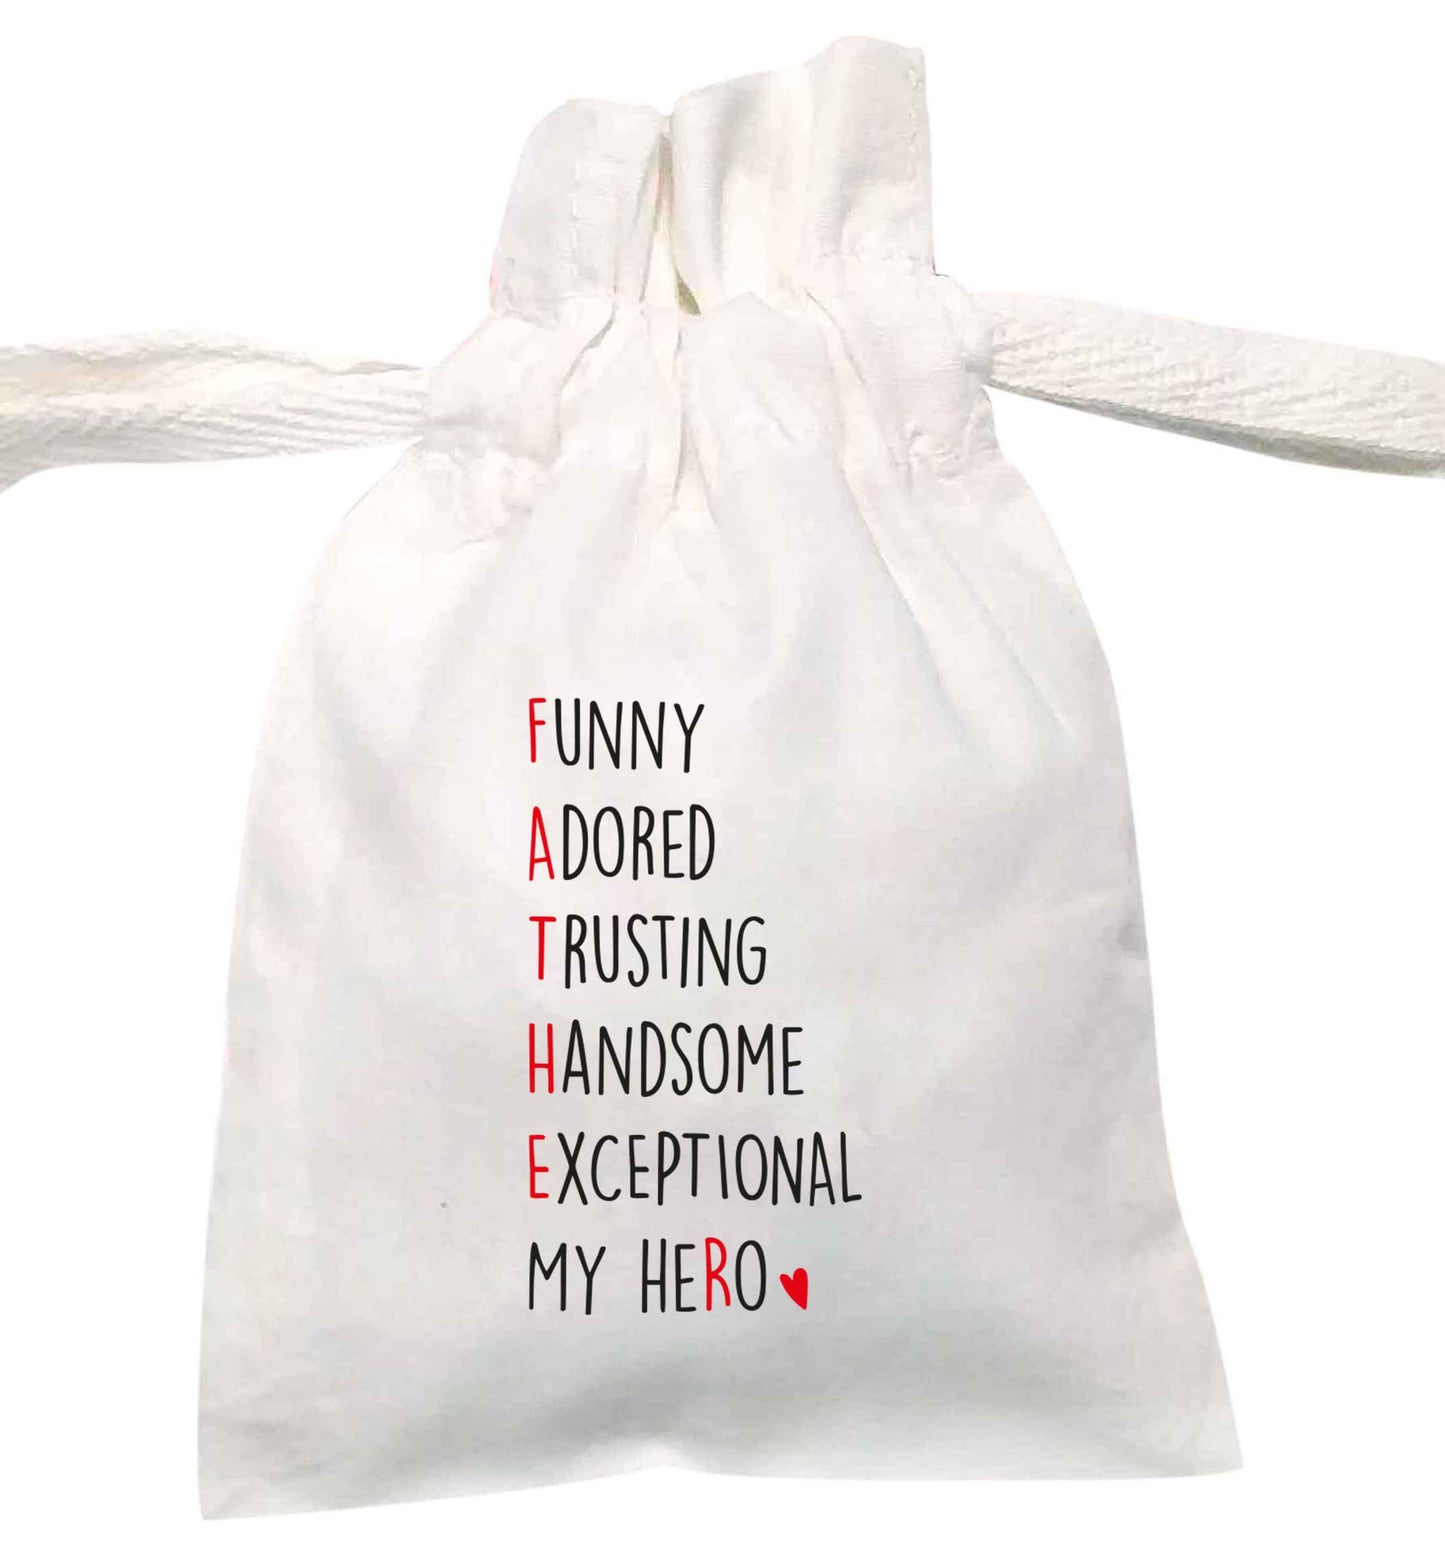 Father meaning hero acrostic poem | XS - L | Pouch / Drawstring bag / Sack | Organic Cotton | Bulk discounts available!